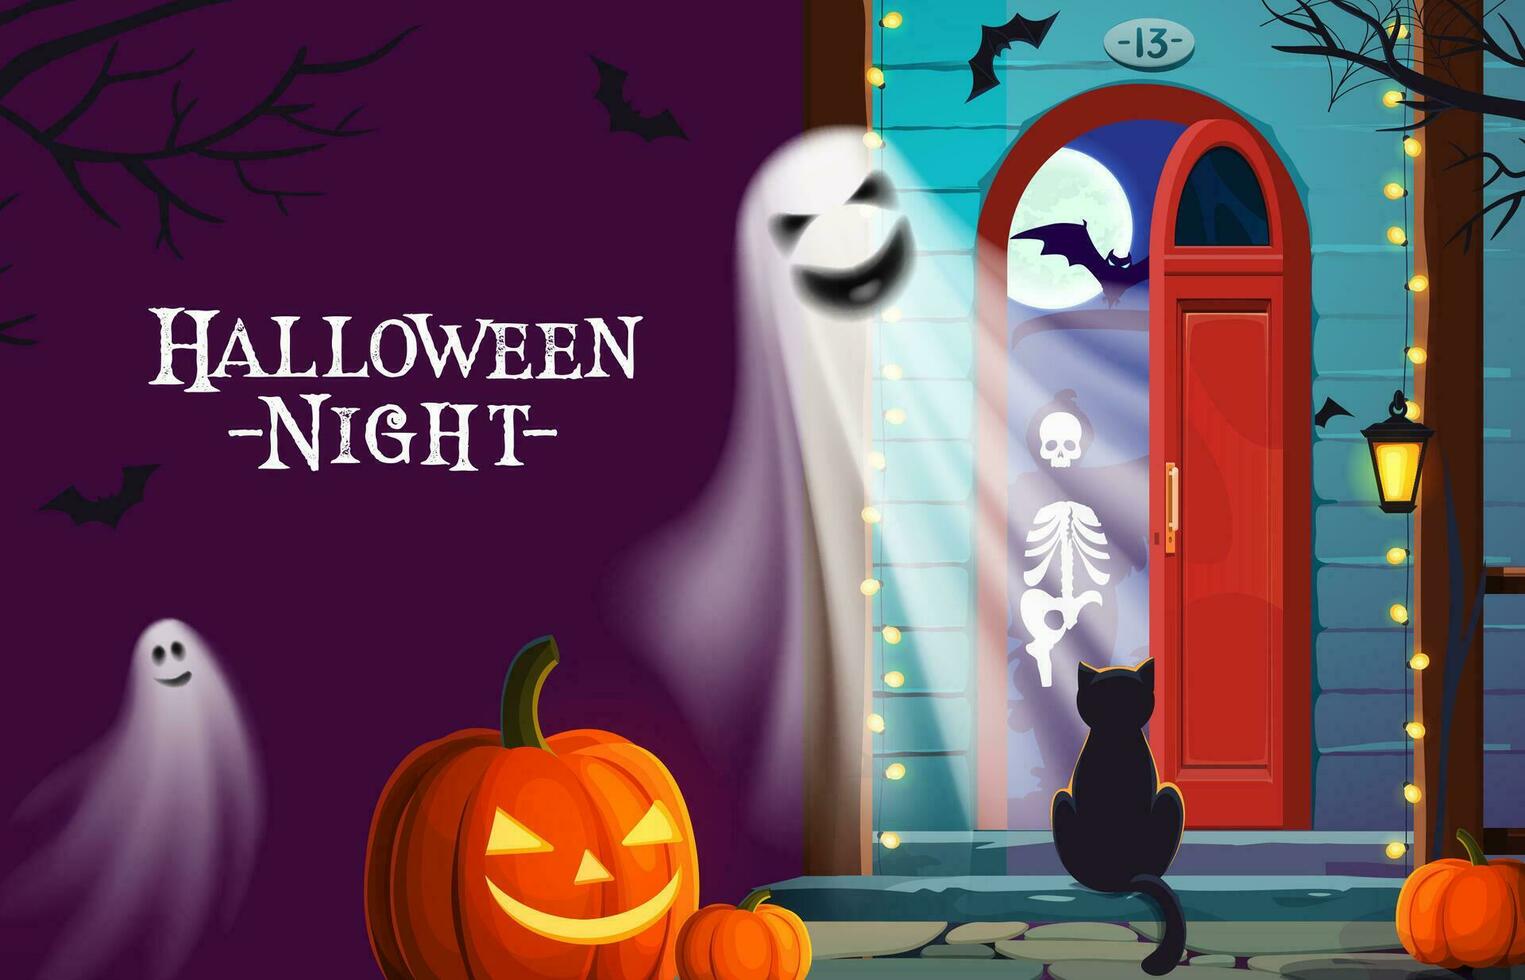 Halloween holiday door and porch with ghosts, bats vector